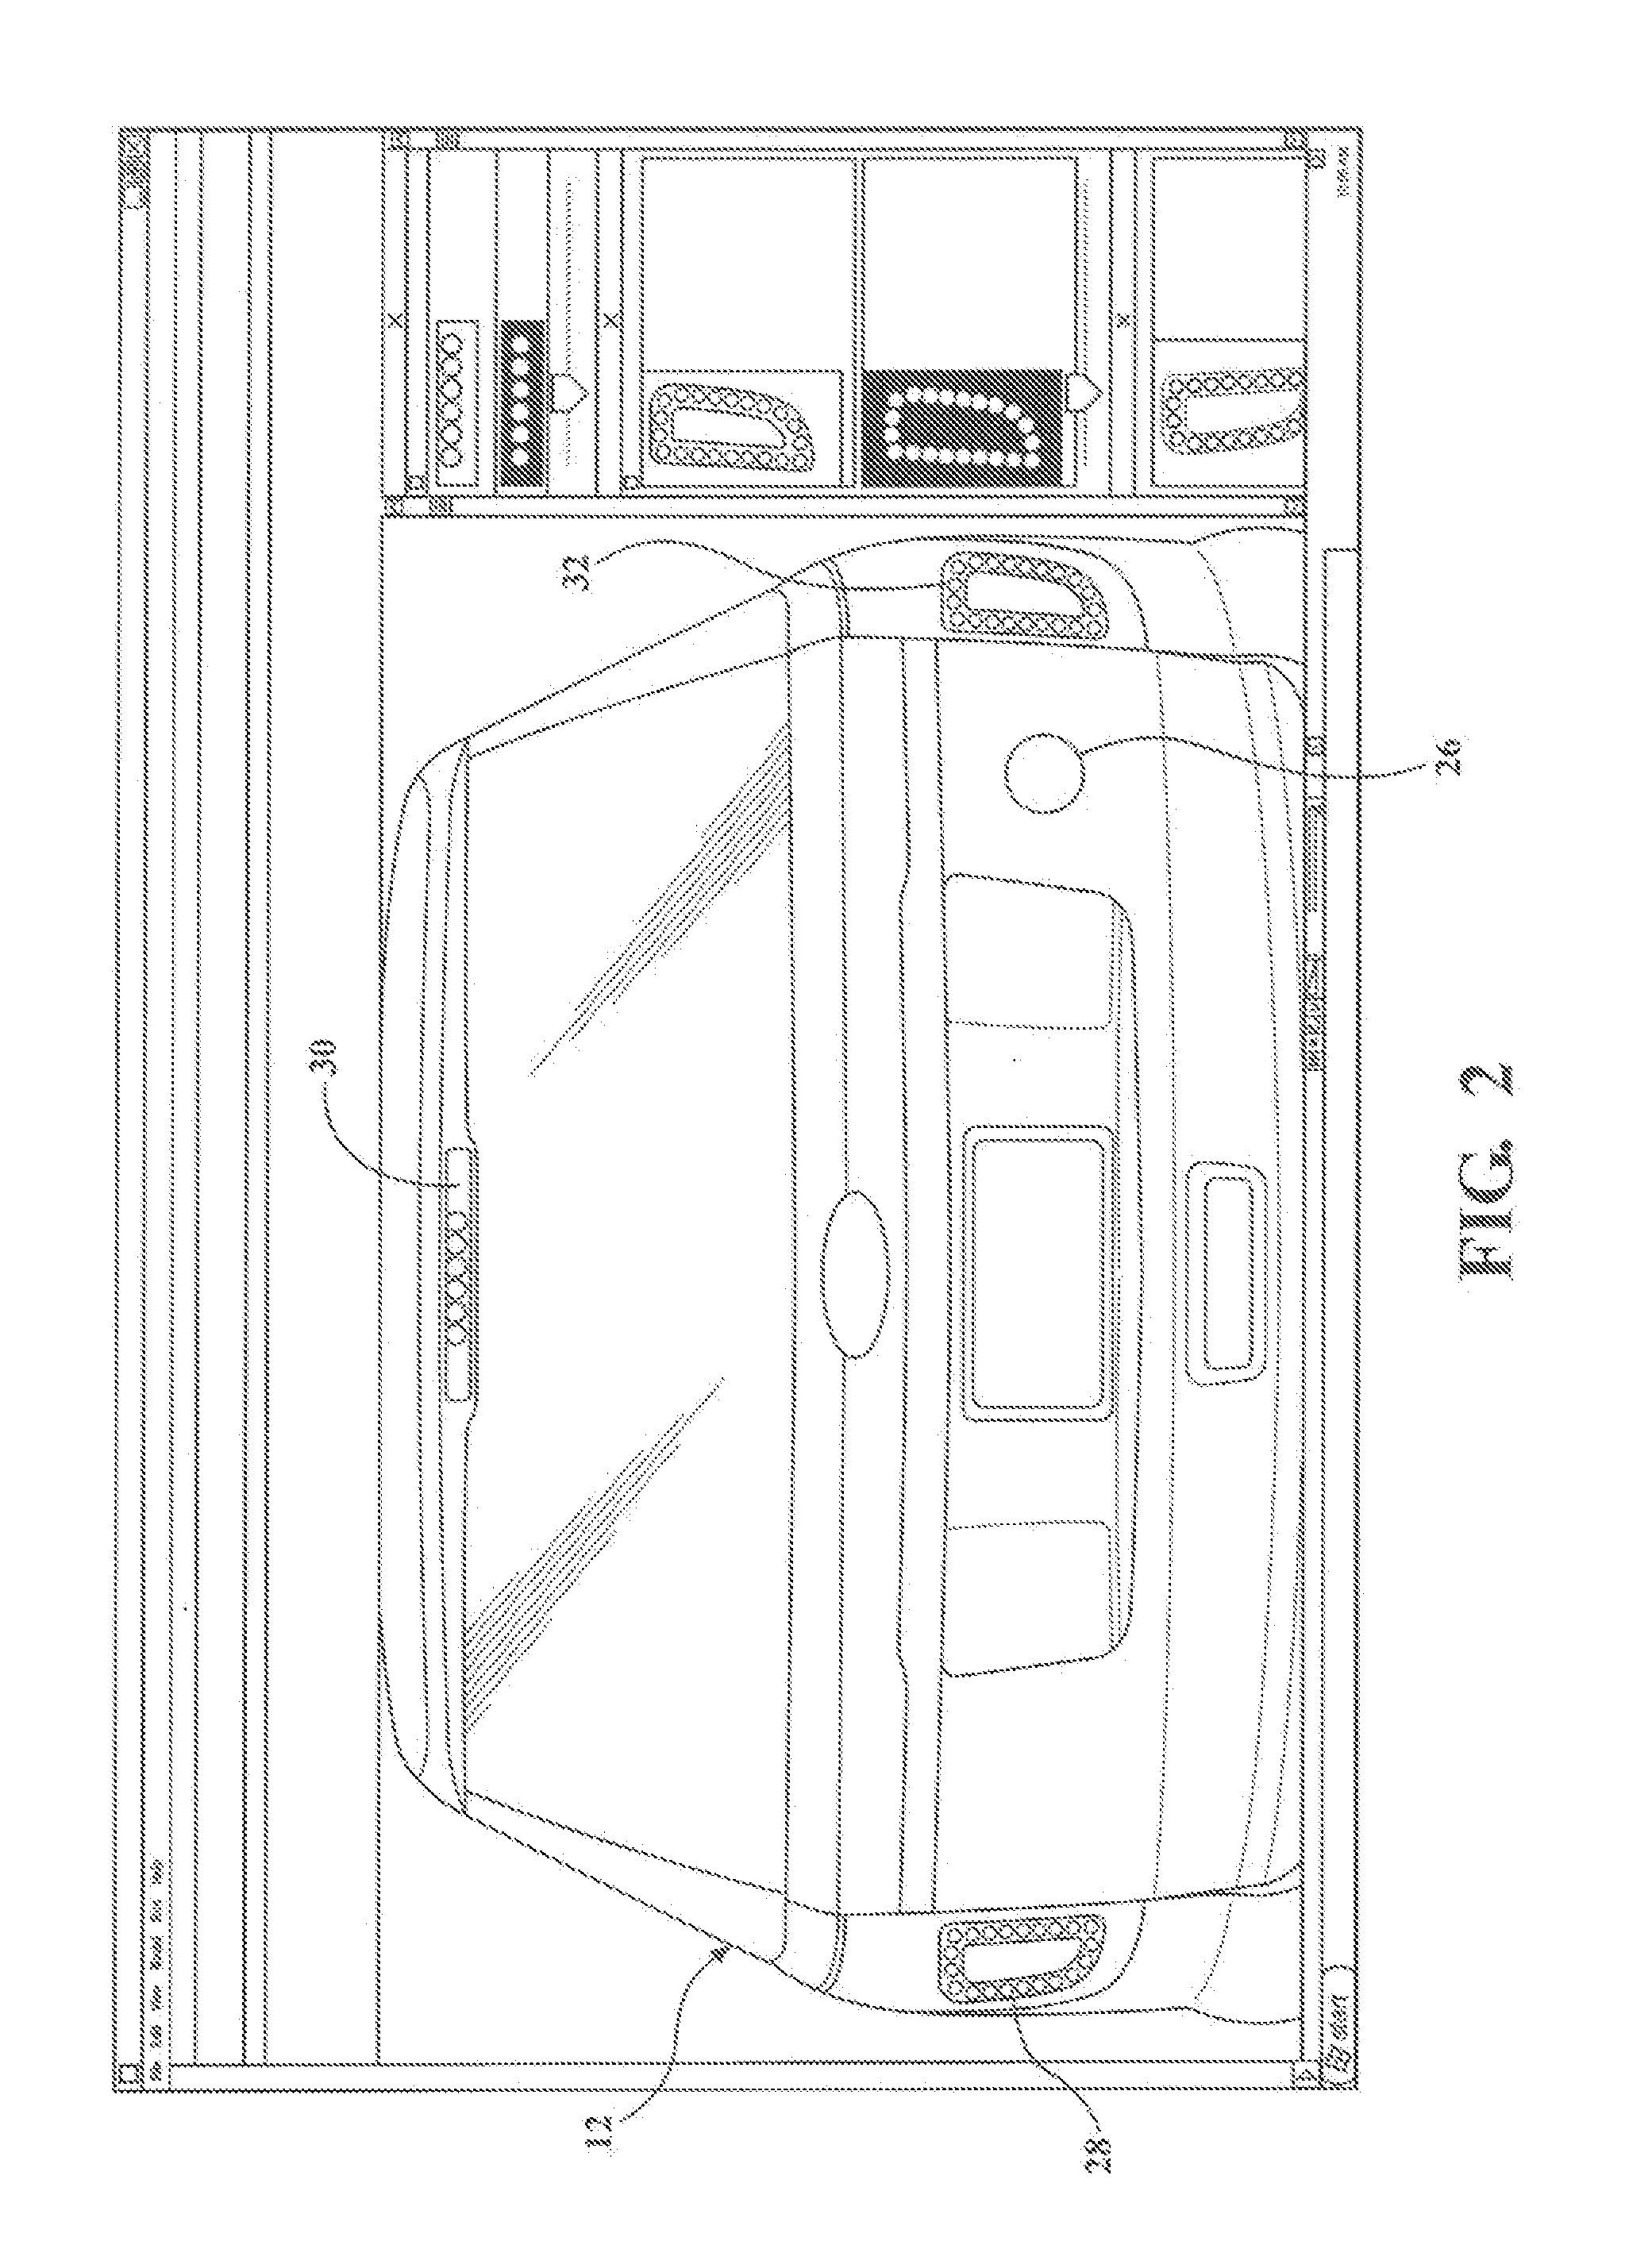 Color vision inspection system and method of inspecting a vehicle